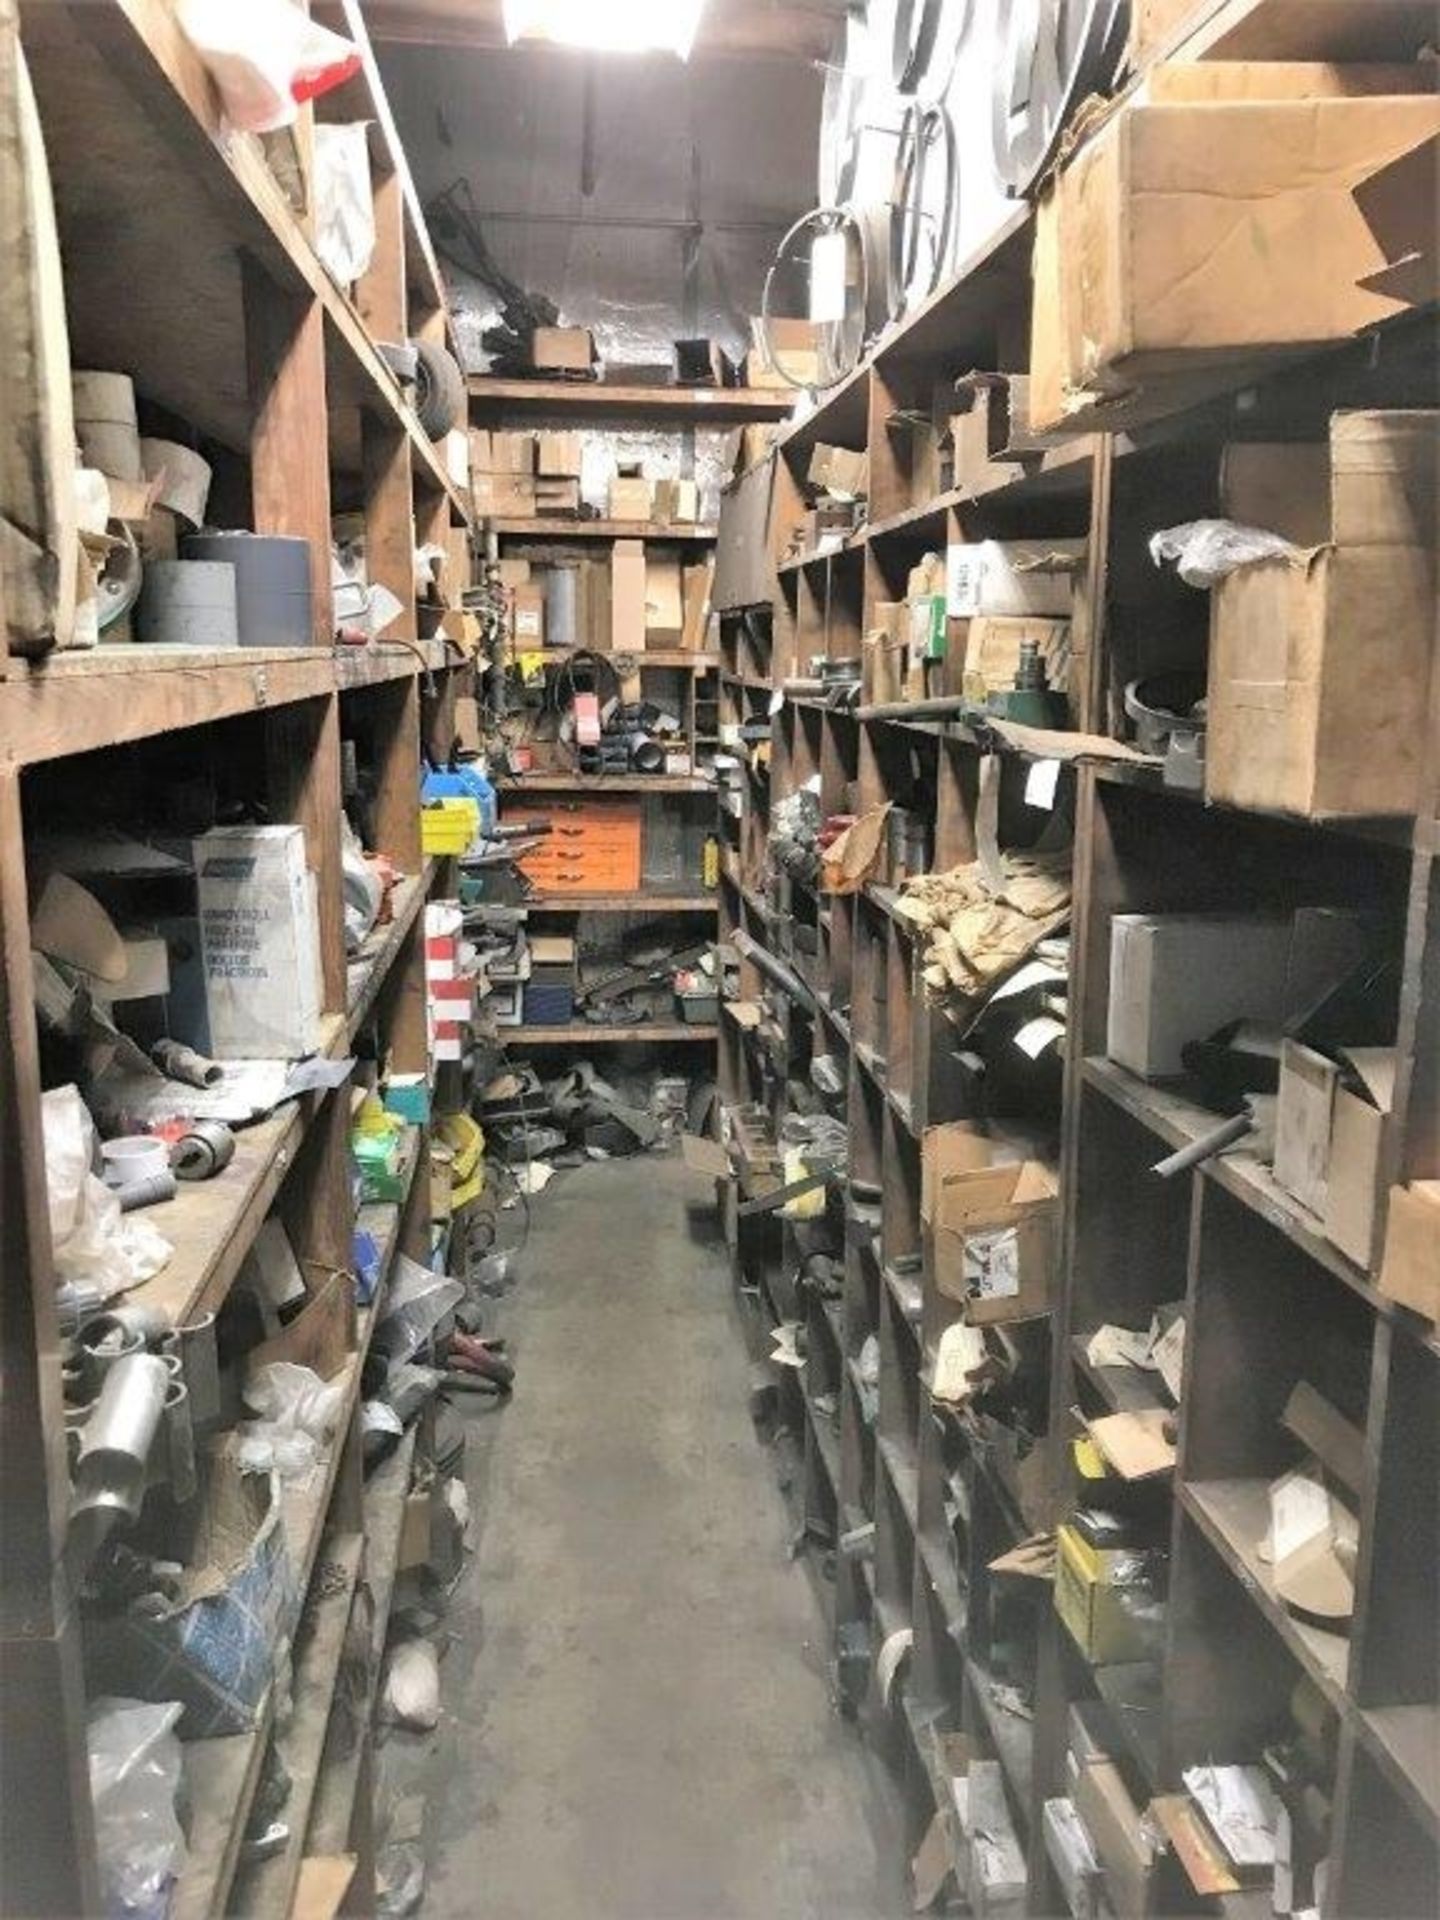 CONTENTS OF MACHINE SHOP PARTS ROOM WITH FACILITY MAINTENANCE AND SPARE MACHINE PARTS.